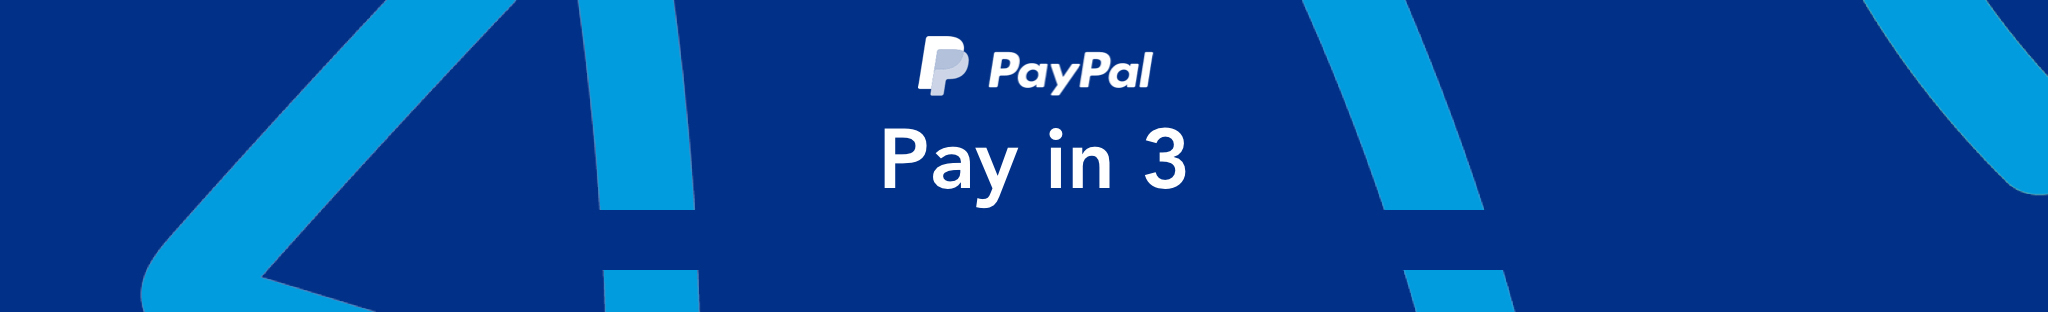 Pay Pal Pay in 3 logo on a blue, patterned background.